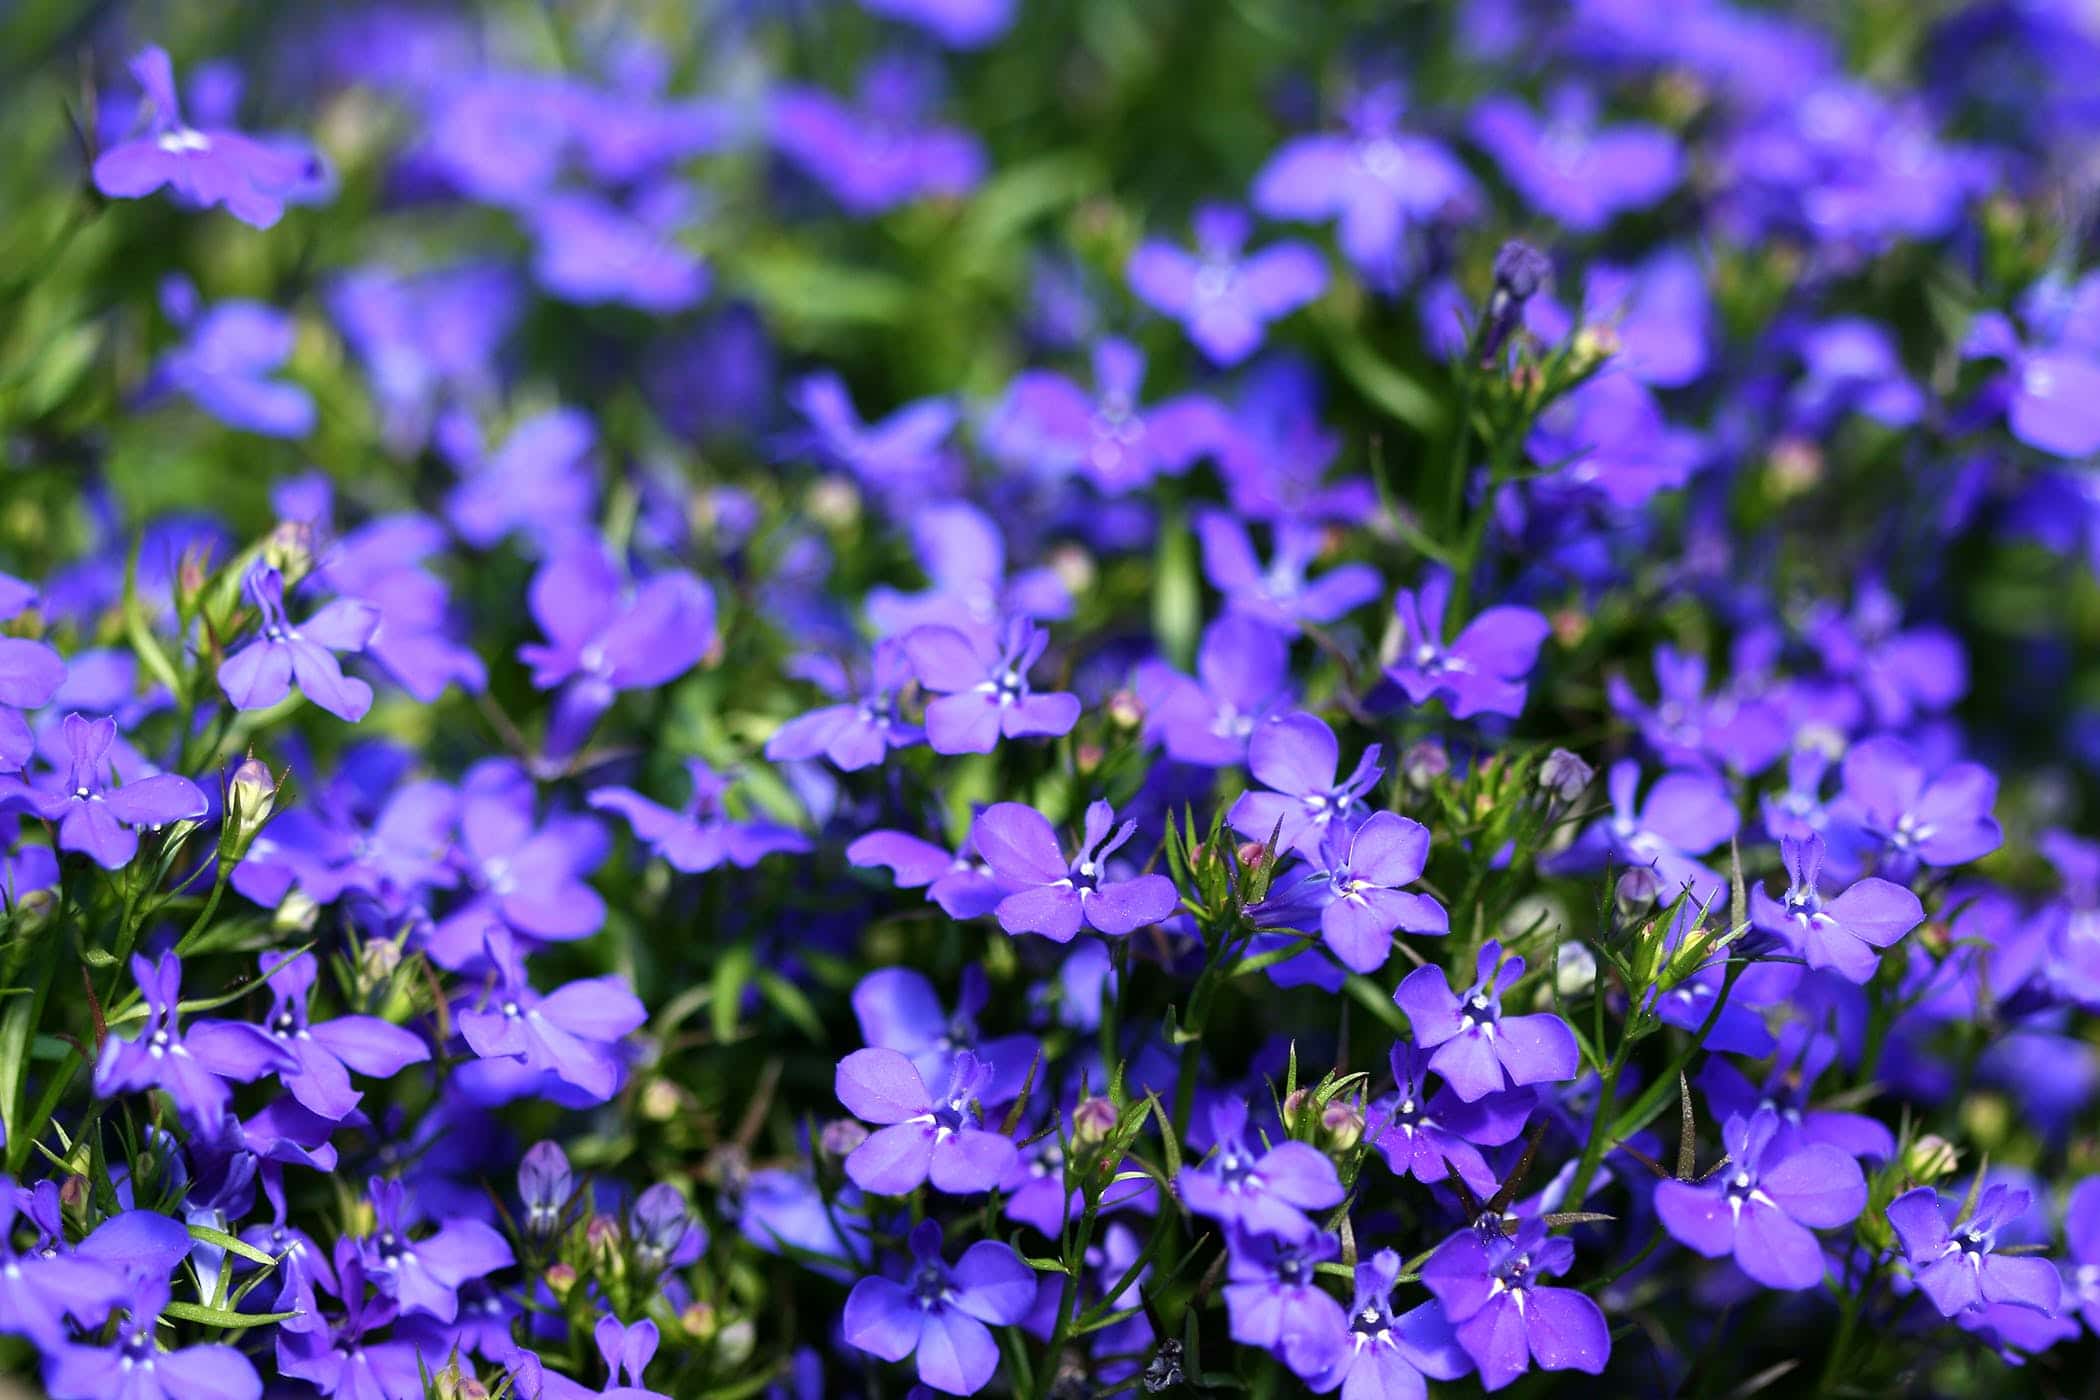 Lobelia: The Most Powerful And Versatile Herb | Medicinal Herb Store